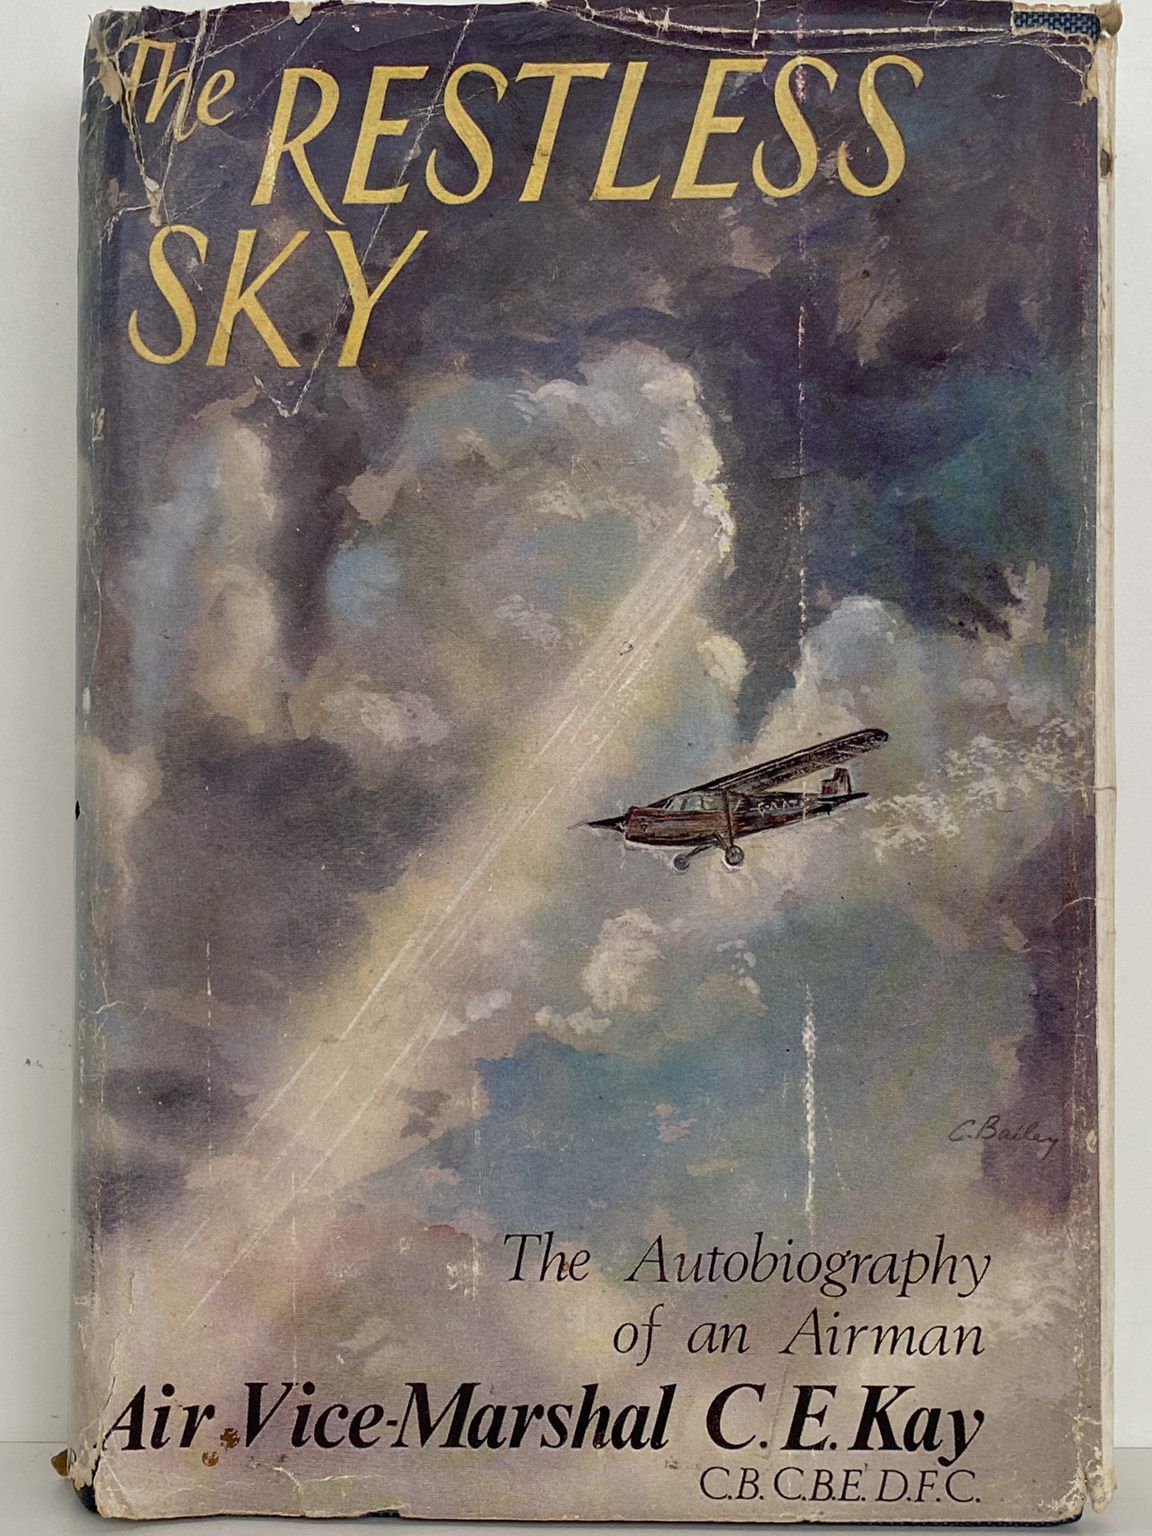 THE RESTLESS SKY: The Autobiography of an Airman